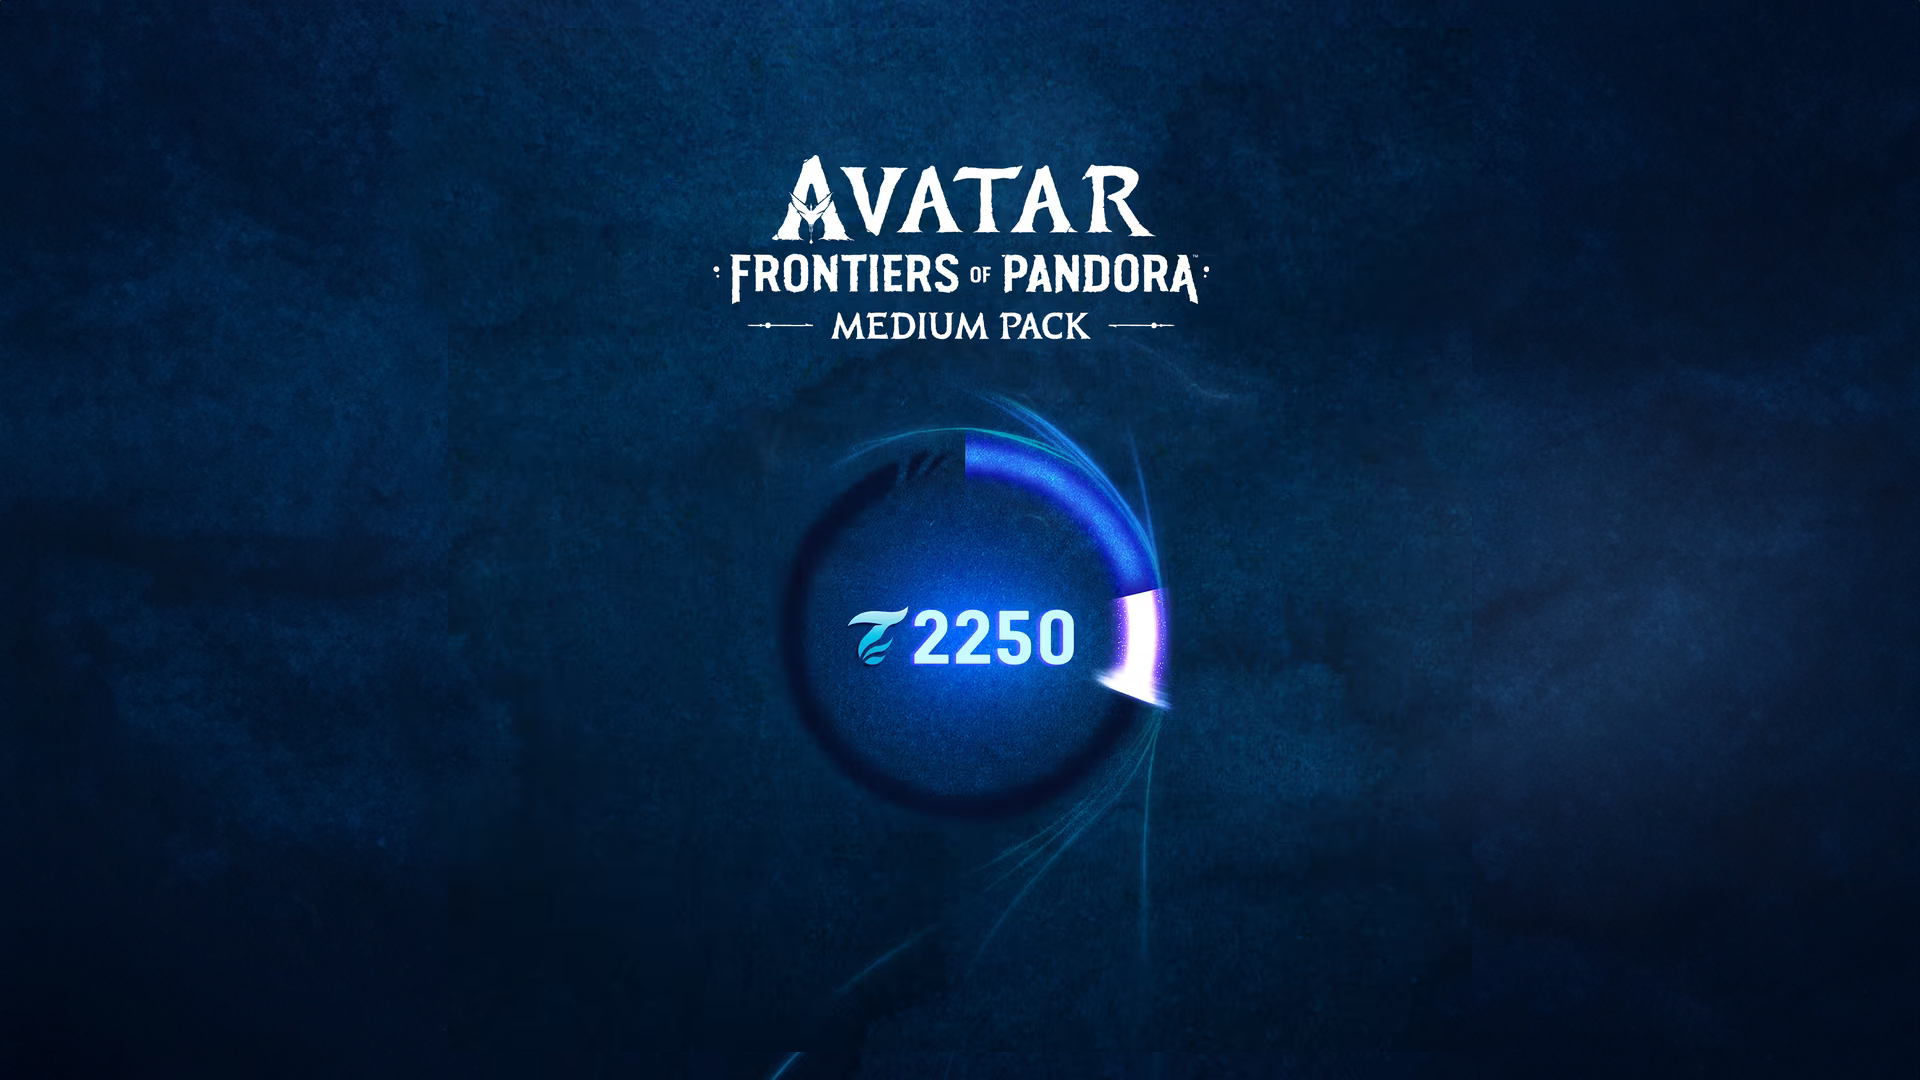 Avatar: Frontiers of Pandora - 2250 VC Pack Xbox Series X|S CD Key, $20.47